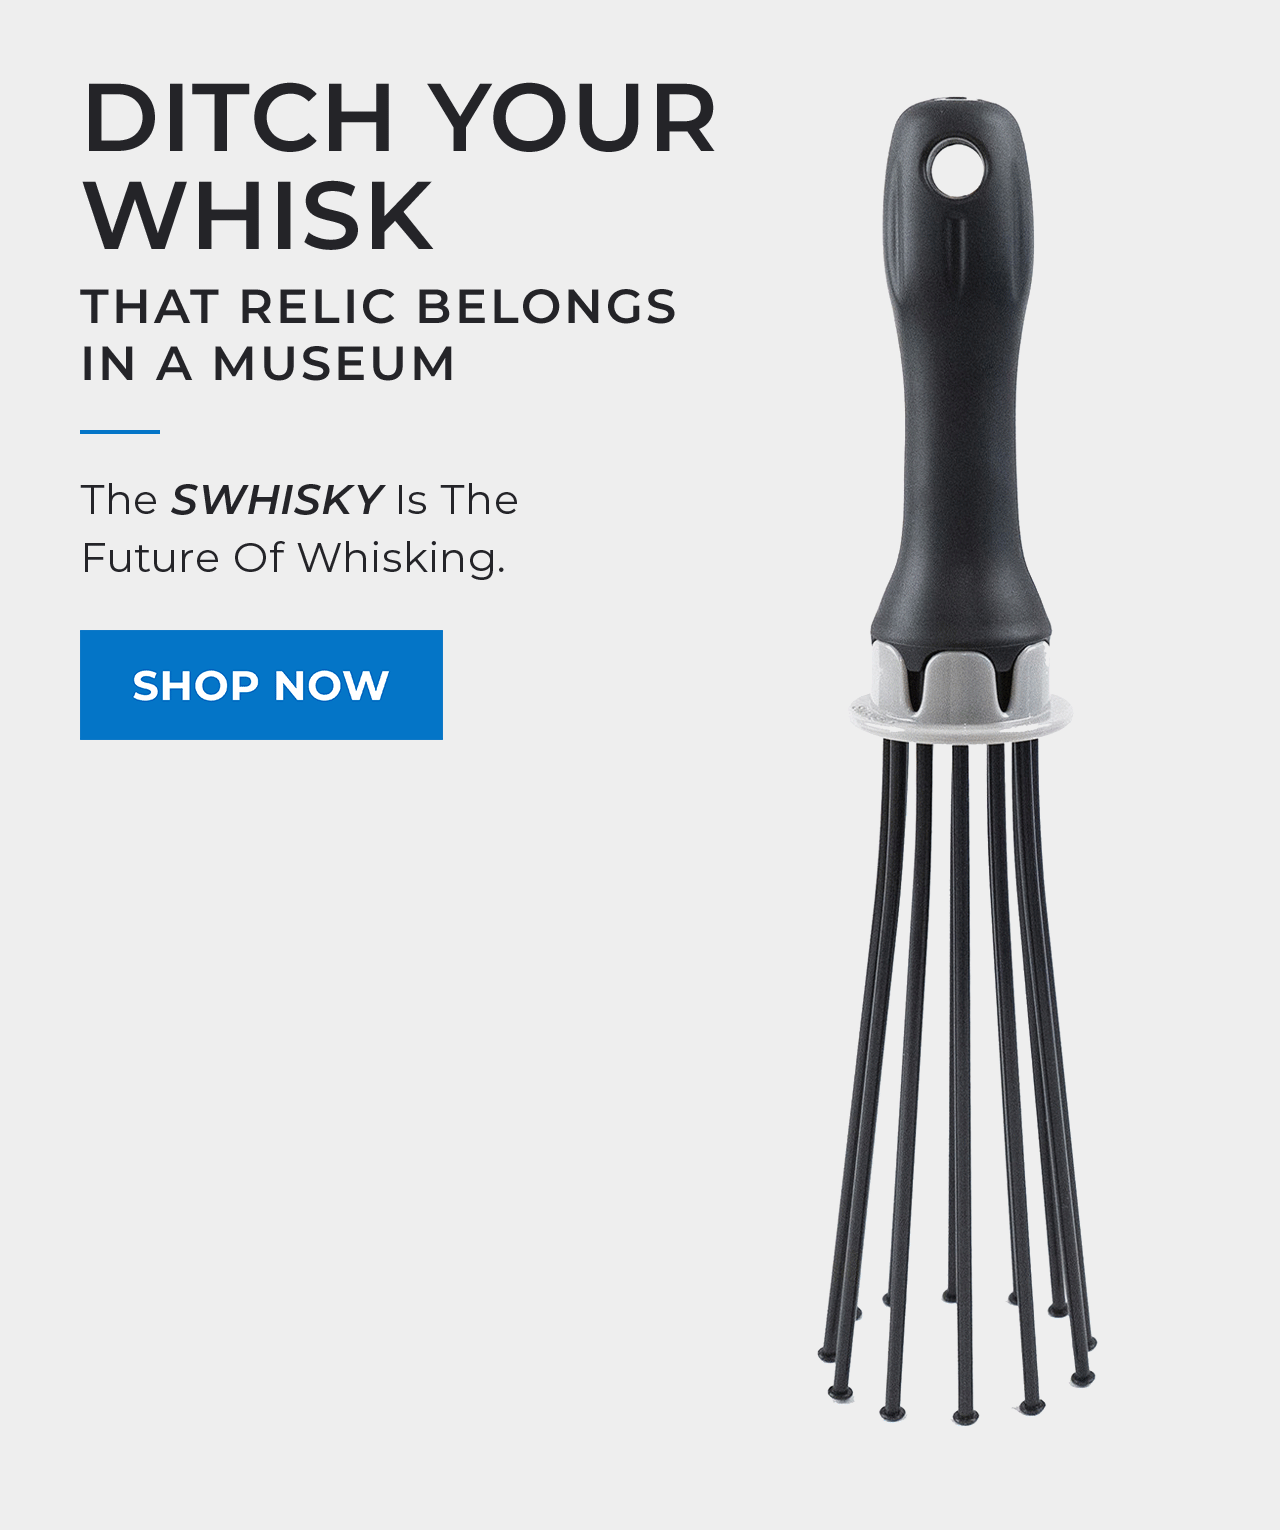 Ditch Your Whisk | SHOP NOW